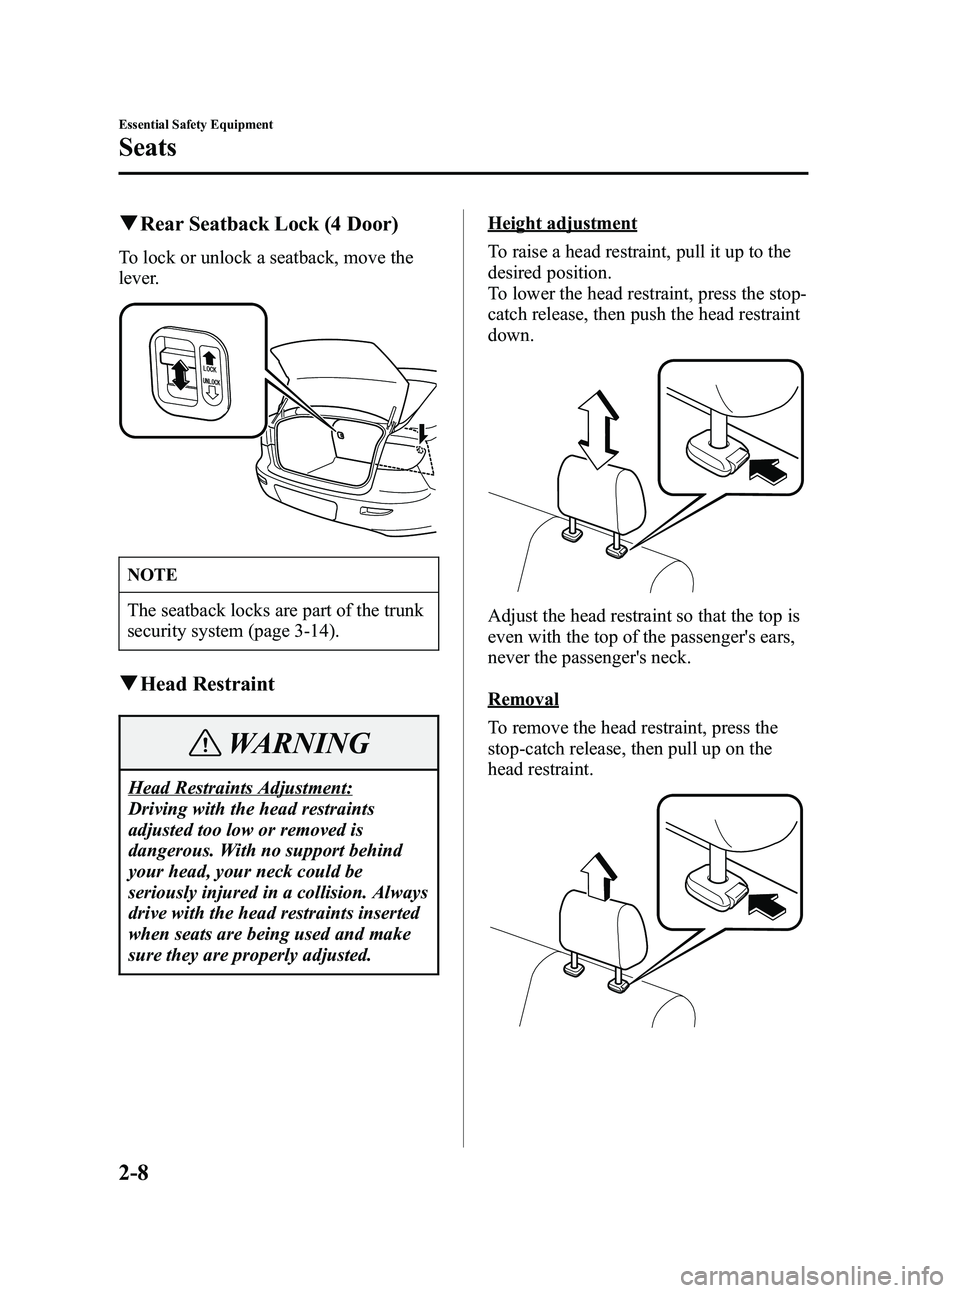 MAZDA MODEL 5 2006 Owners Manual Black plate (22,1)
qRear Seatback Lock (4 Door)
To lock or unlock a seatback, move the
lever.
NOTE
The seatback locks are part of the trunk
security system (page 3-14).
qHead Restraint
WARNING
Head Re